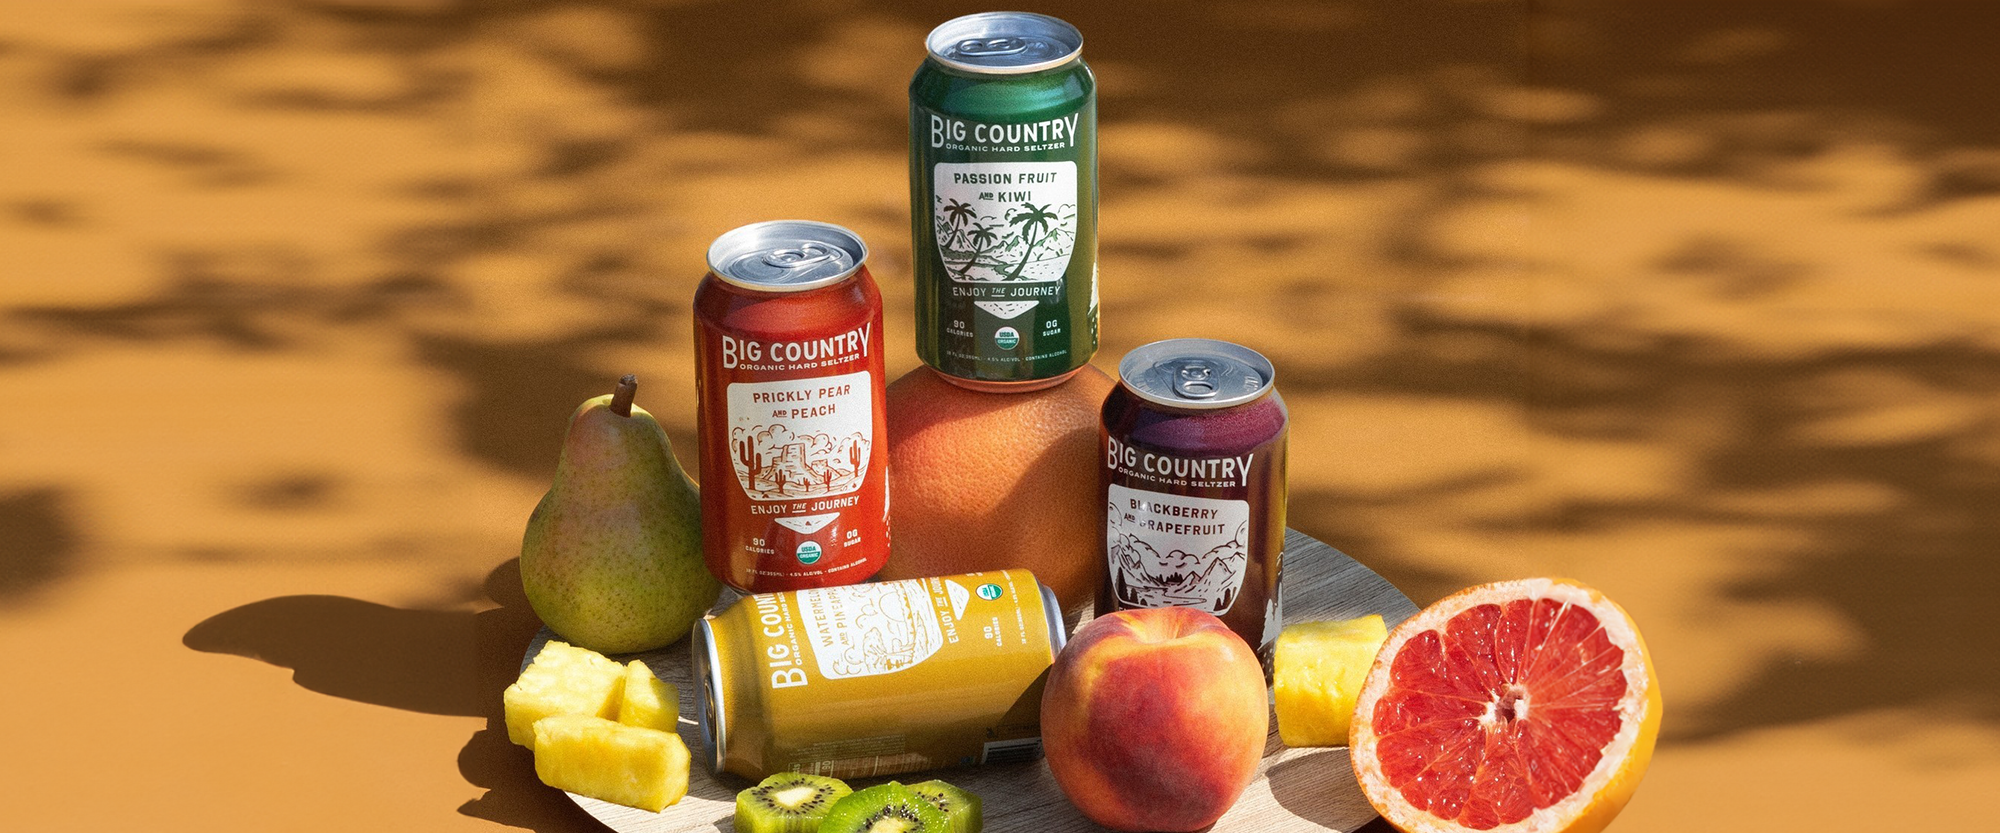 Hard seltzer cans among fruits on tan background with shadows.